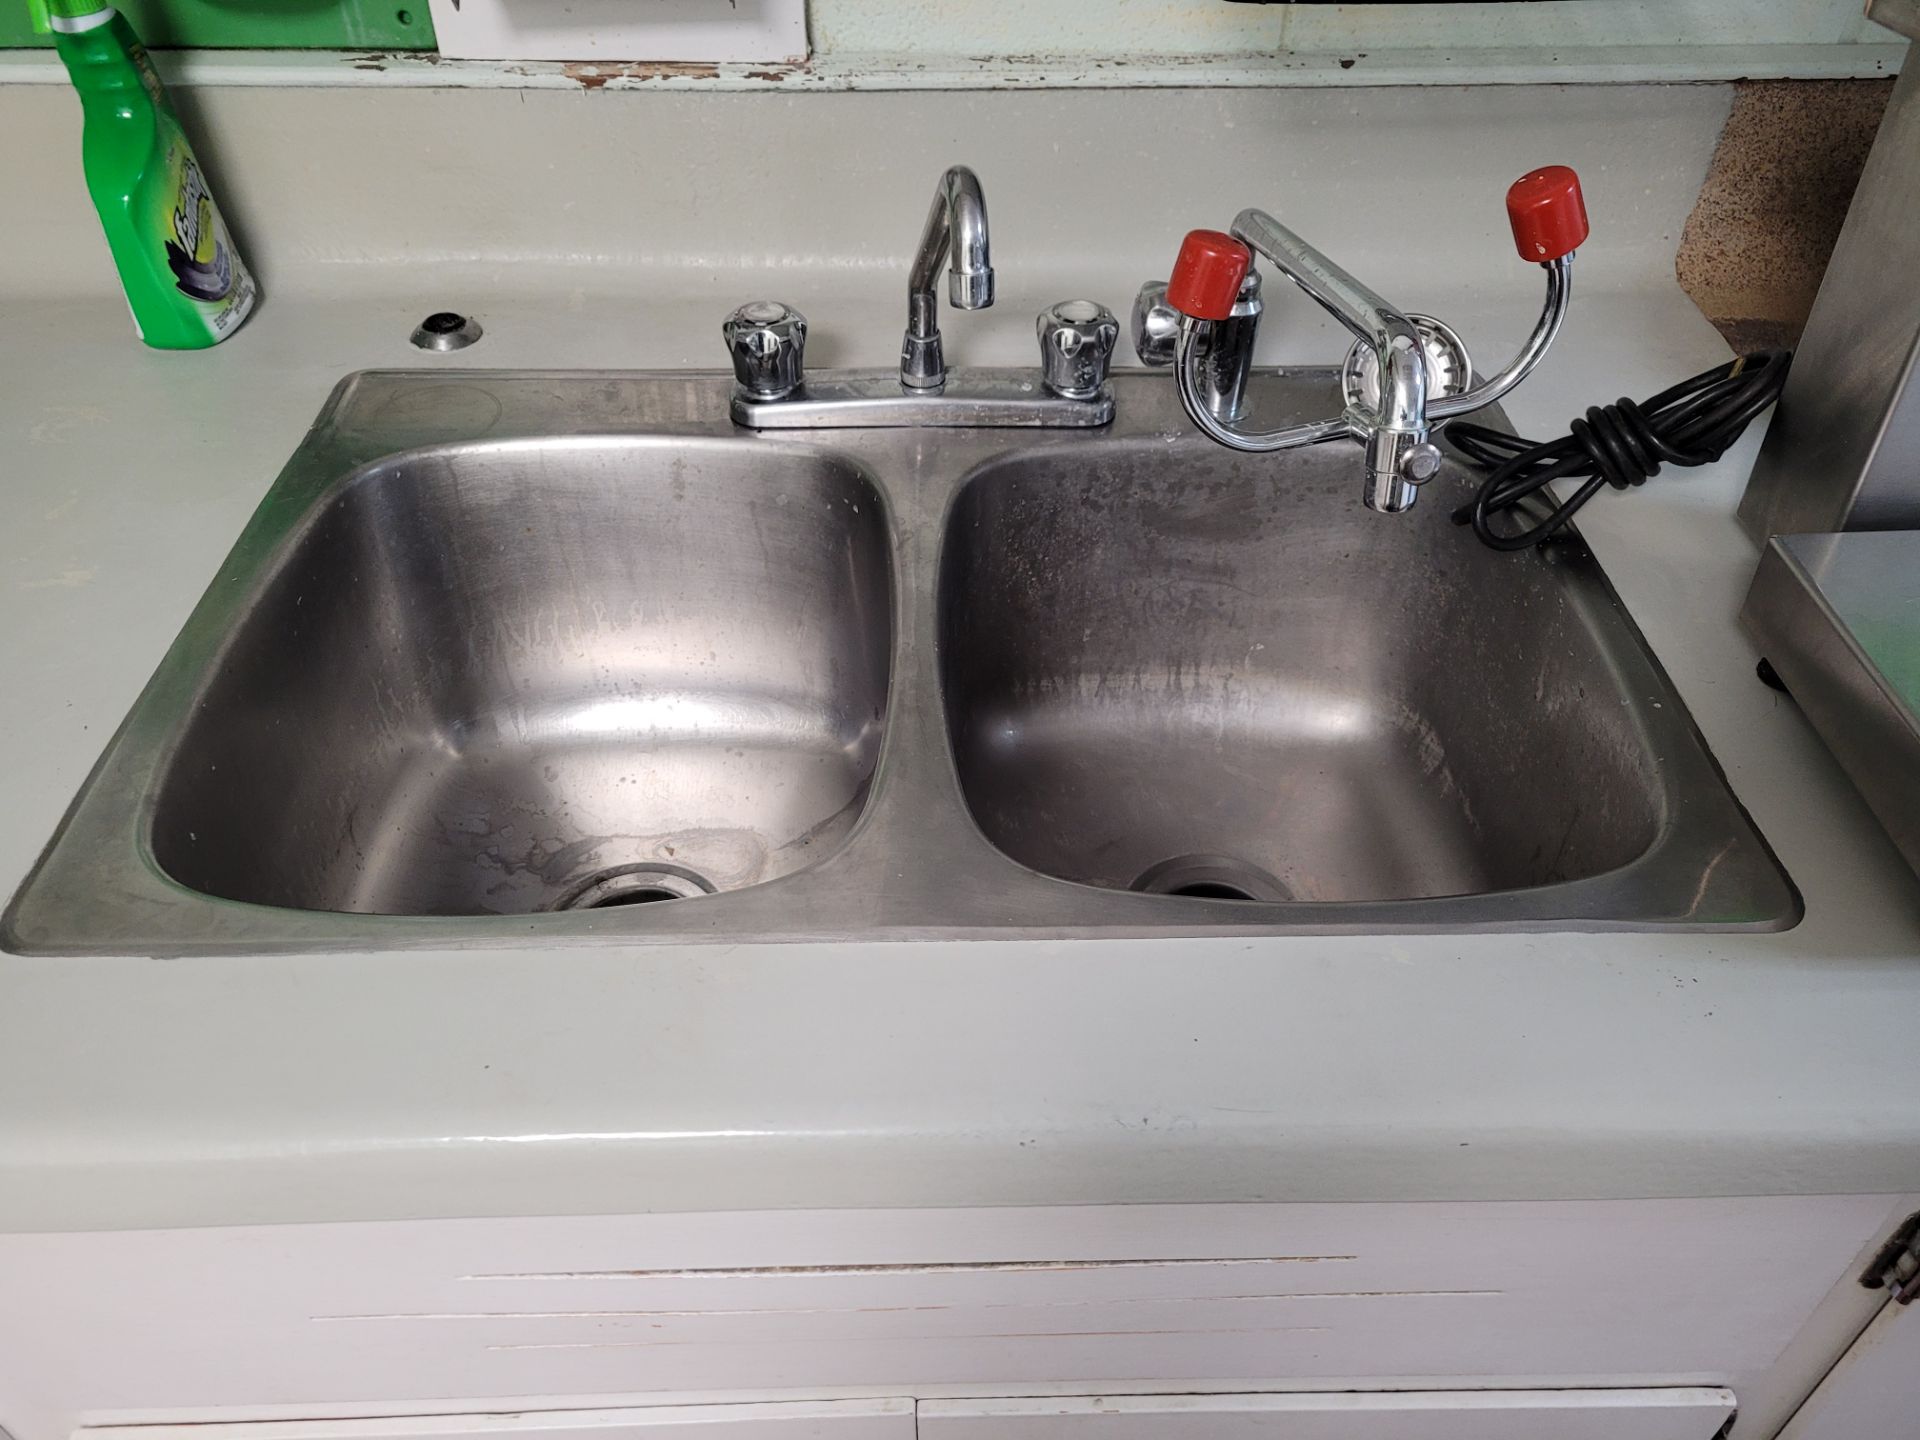 Lot of S/S Sinks and wooden cabinetry in Laboratory Area - Image 6 of 12